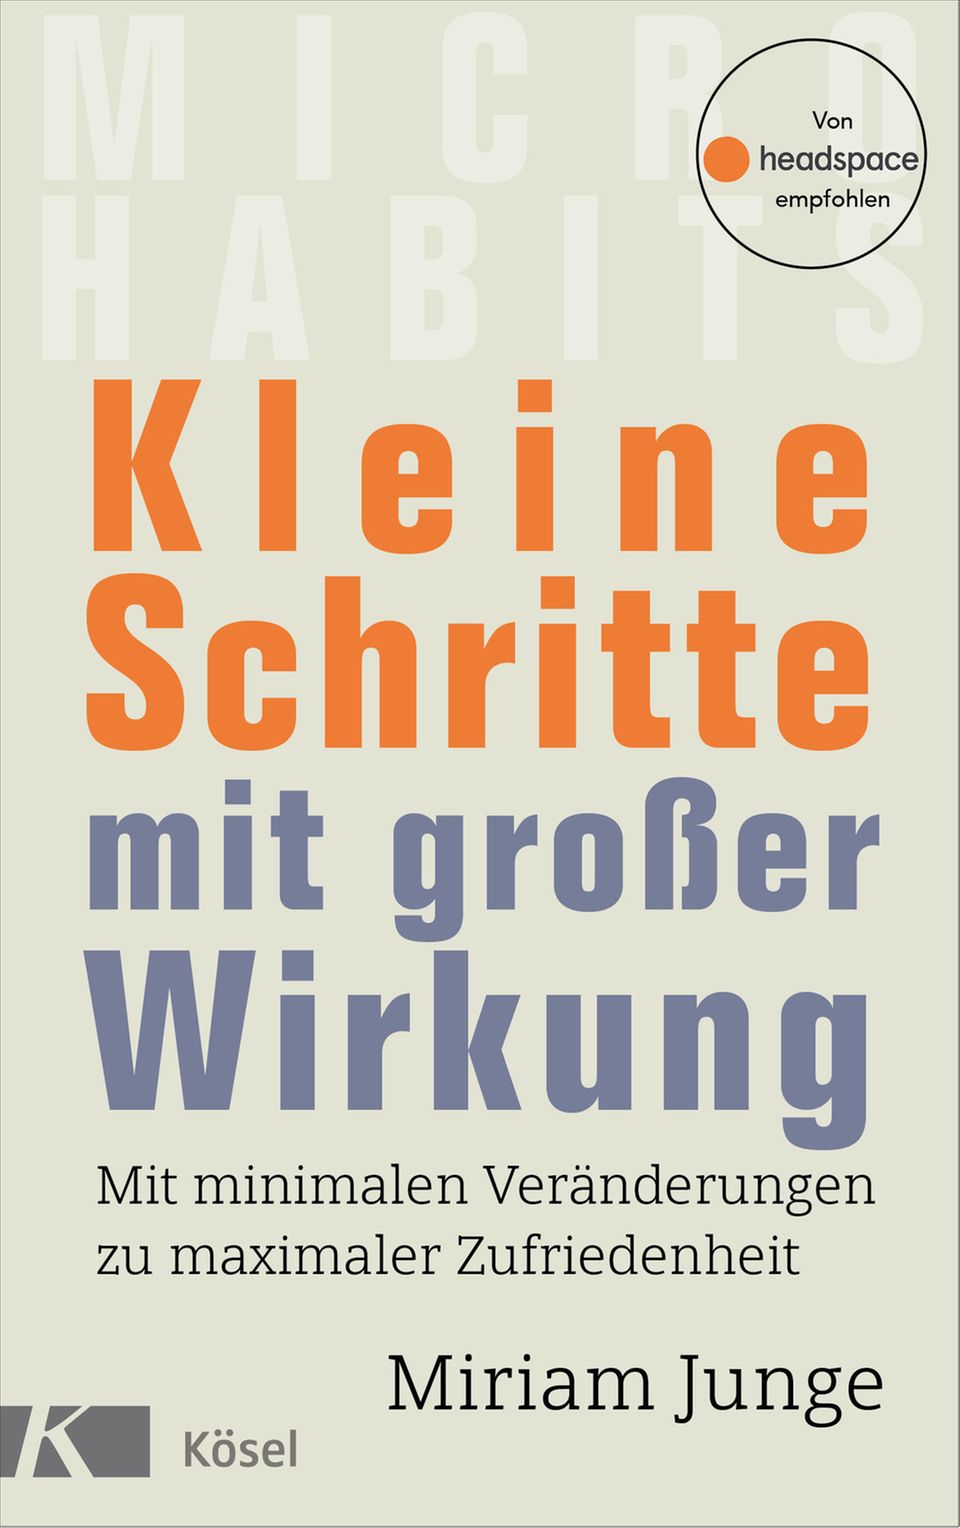 Buch cover